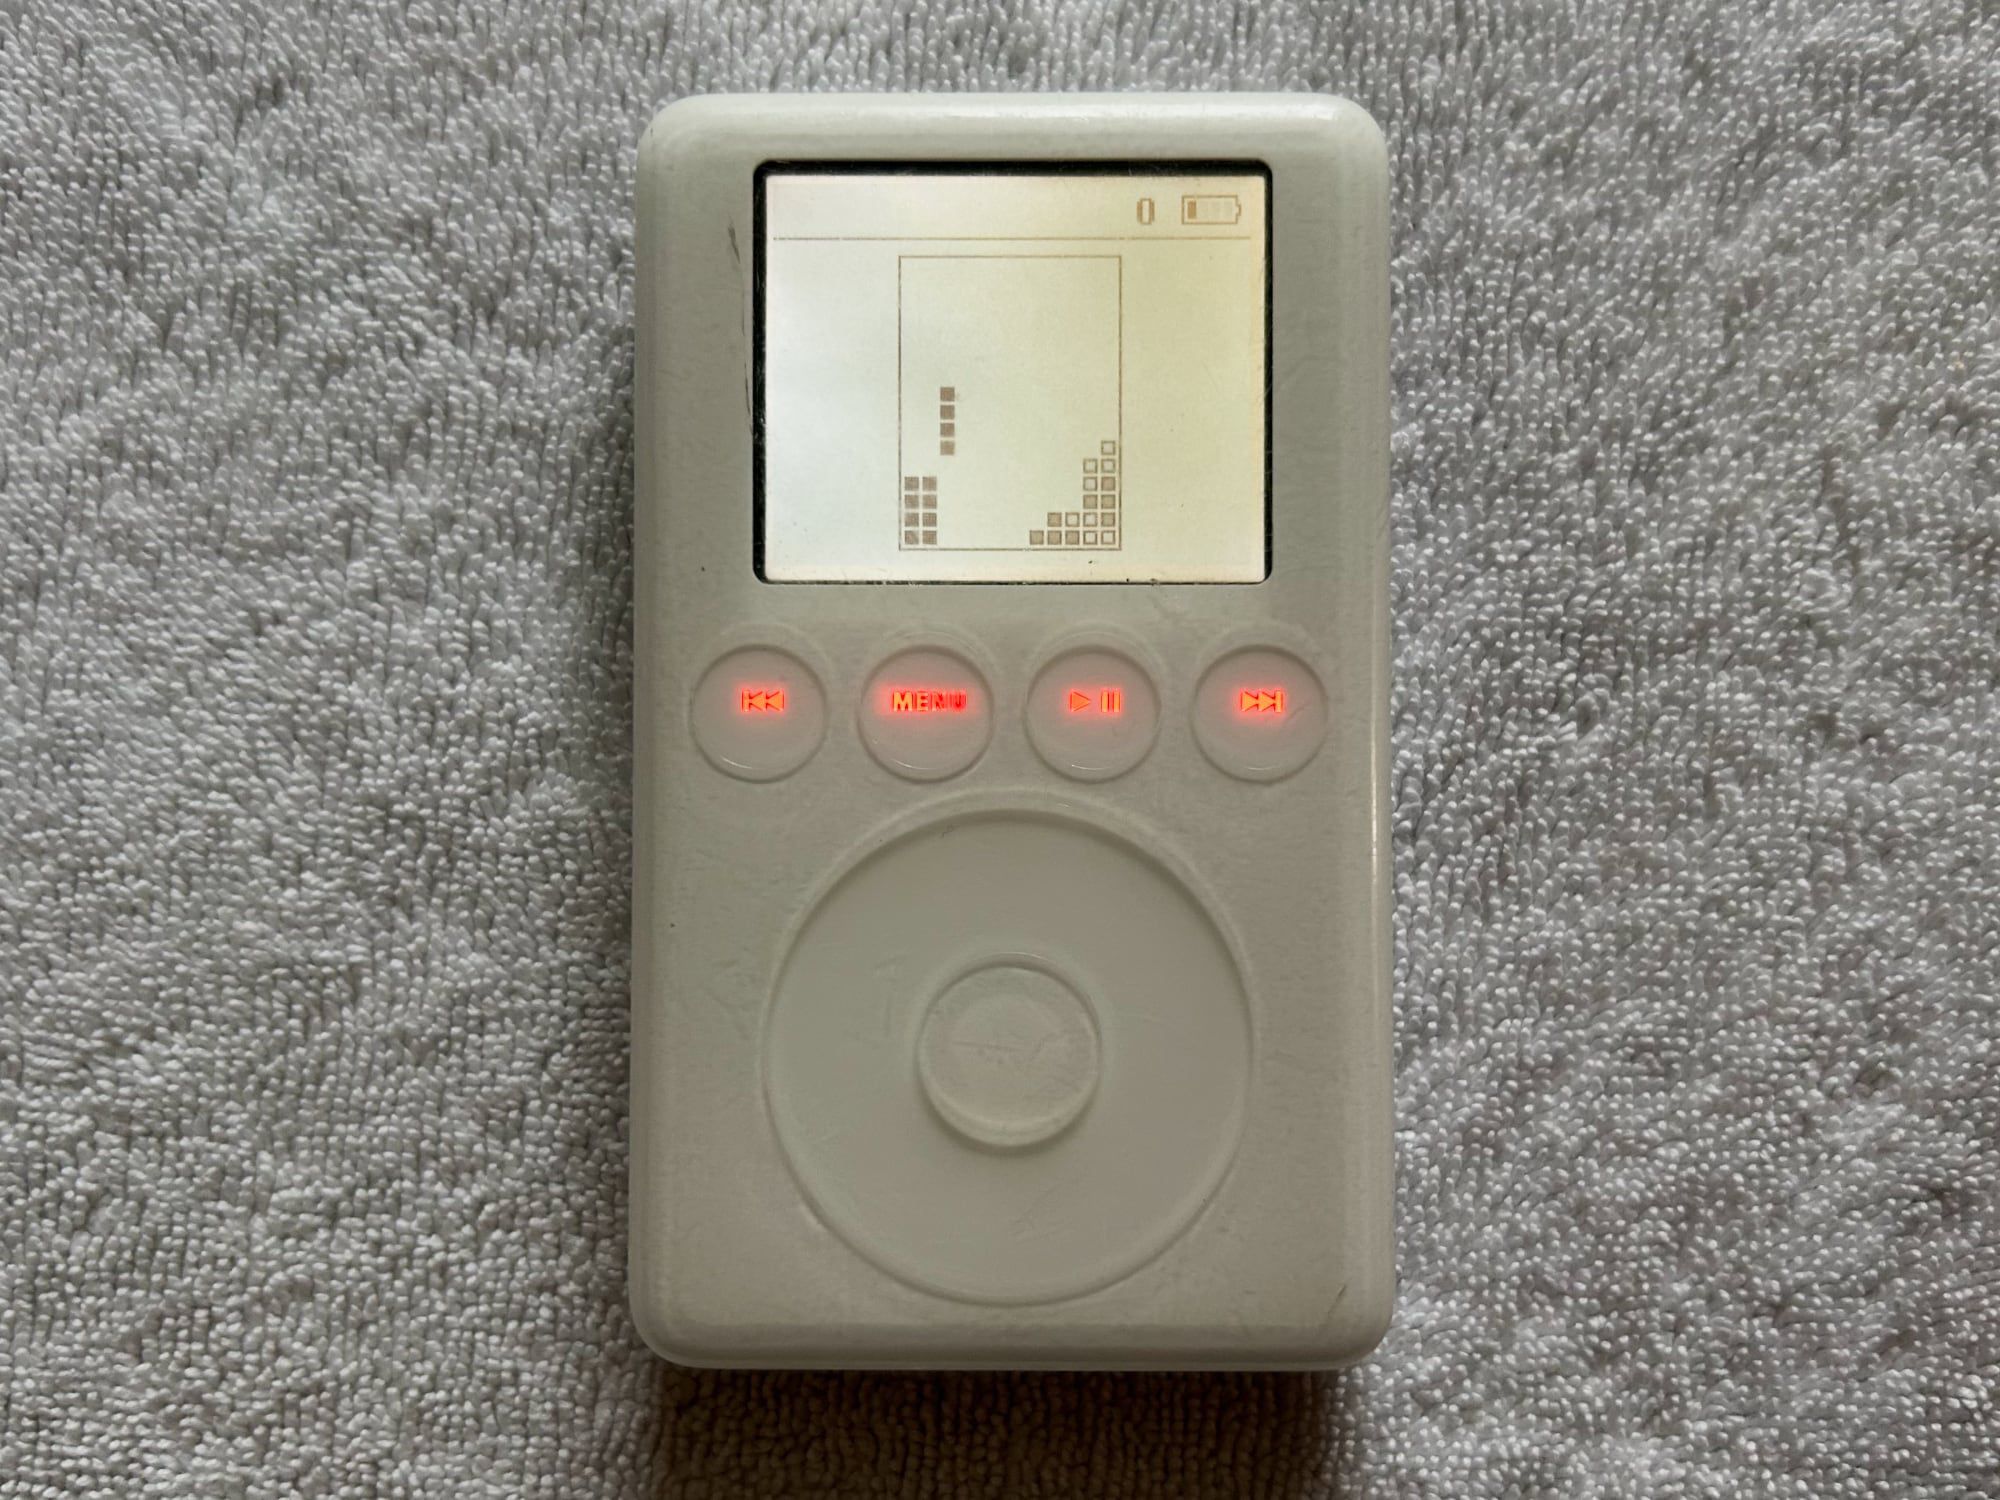 Apple once designed a Tetris clone called 